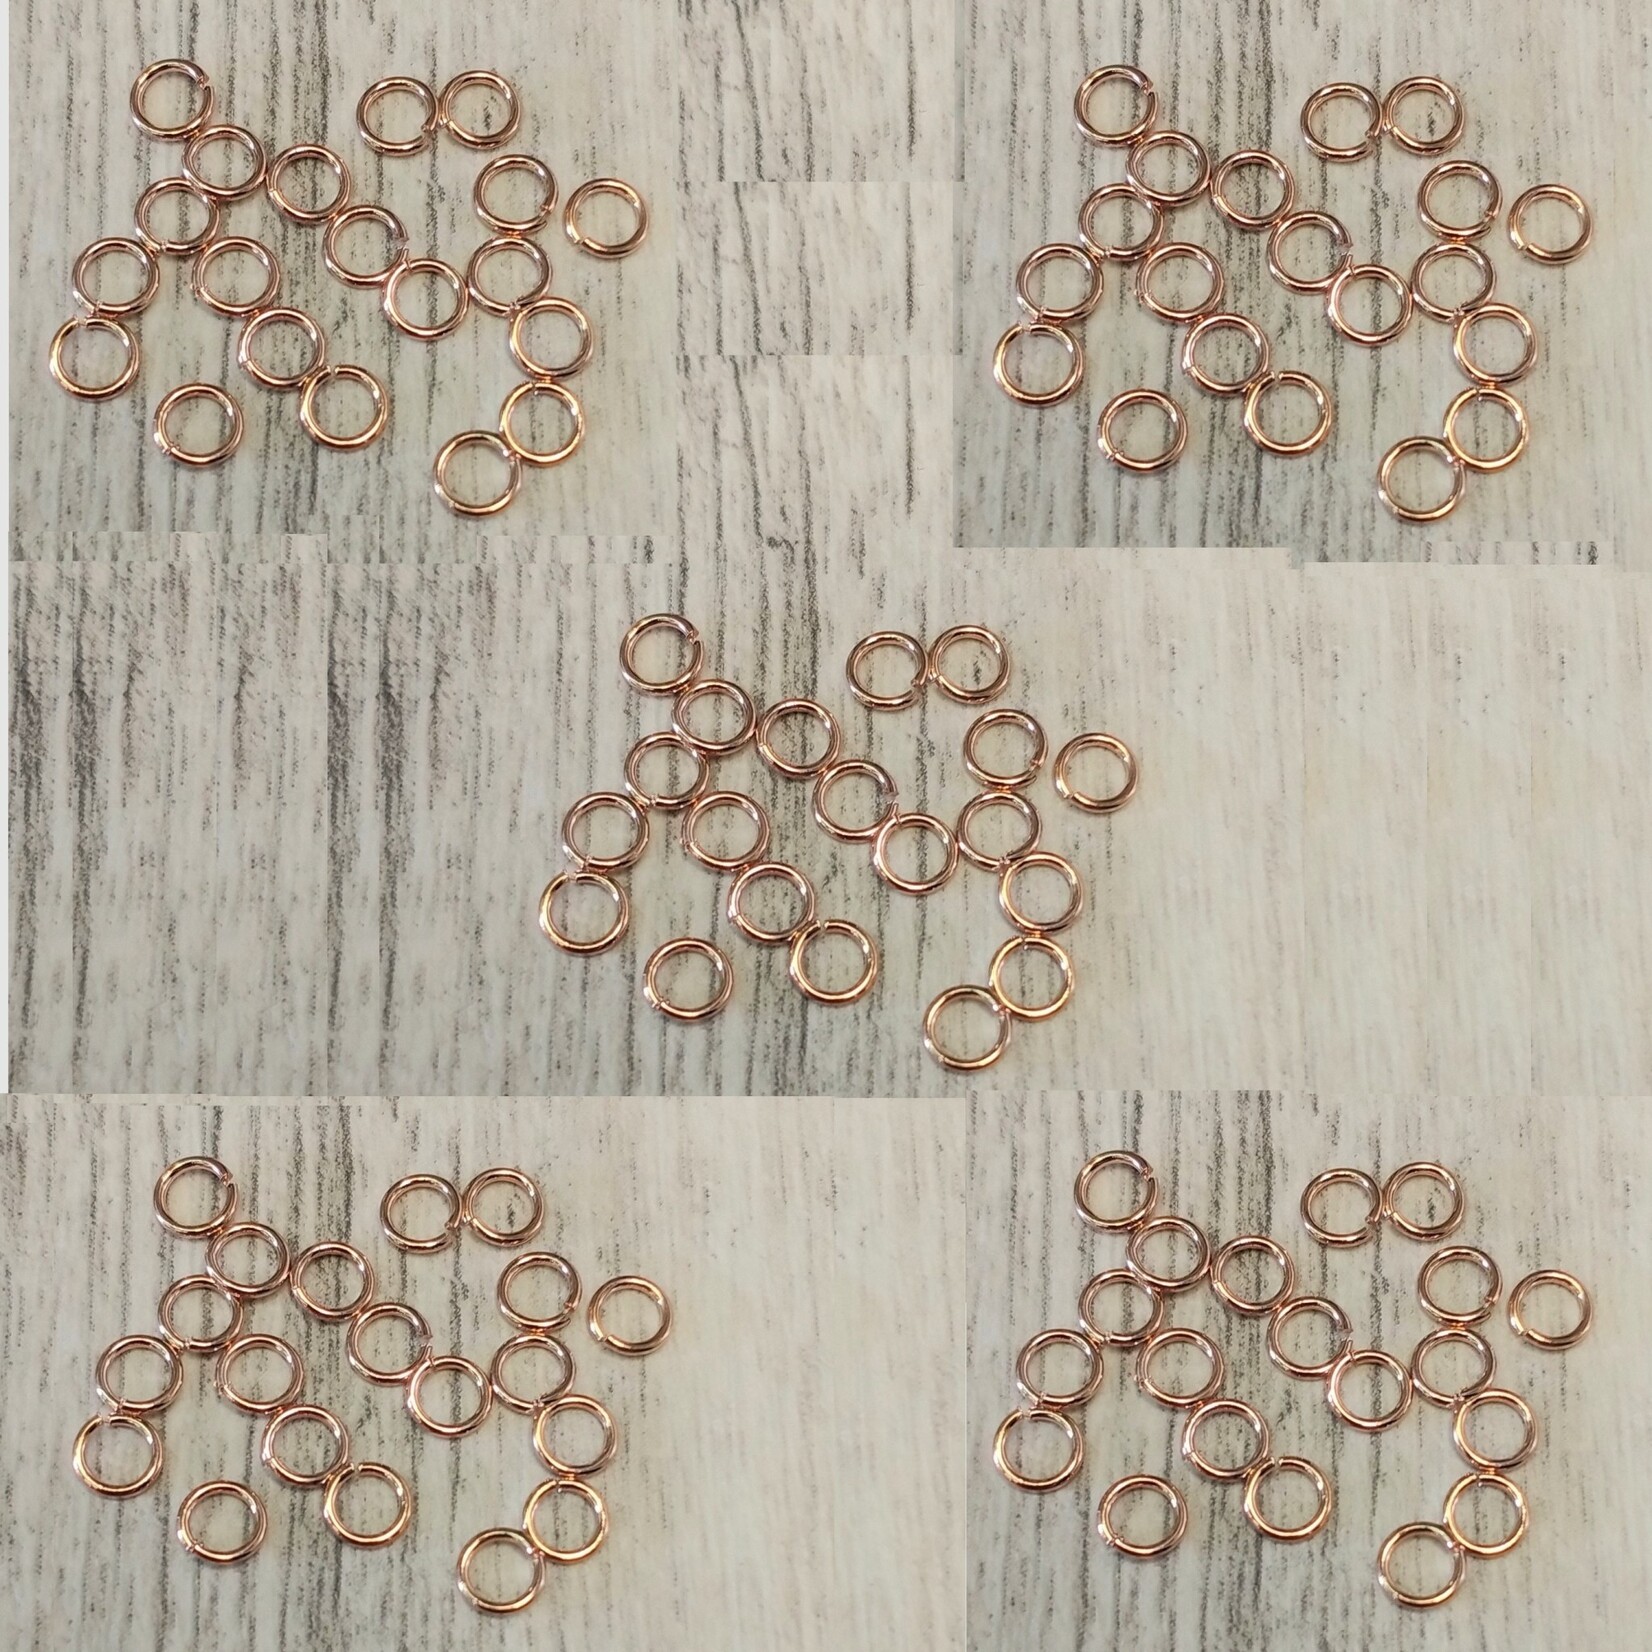 Rose Gold Plated Jump Ring  4mm 21ga Nickel-Free - 100 pieces